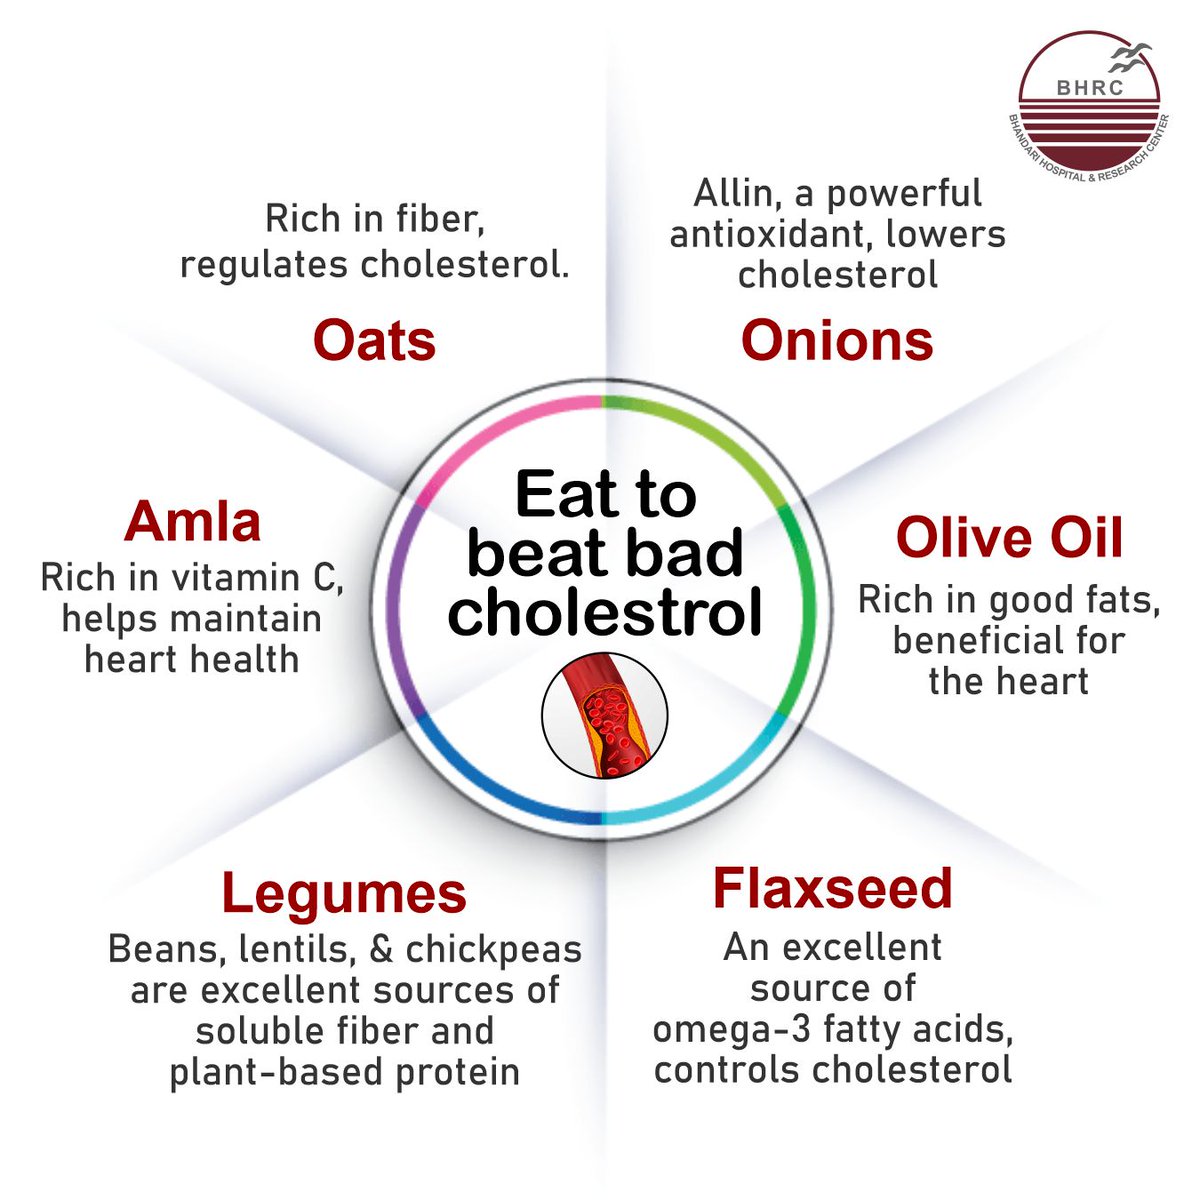 Discover the power of food in combating bad cholesterol!  From oats' fiber boost to amla's heart-healthy punch, these superfoods like onions, legumes, olive oil, and flaxseeds can help regulate cholesterol levels naturally. 
#CholesterolControl #HealthyEating